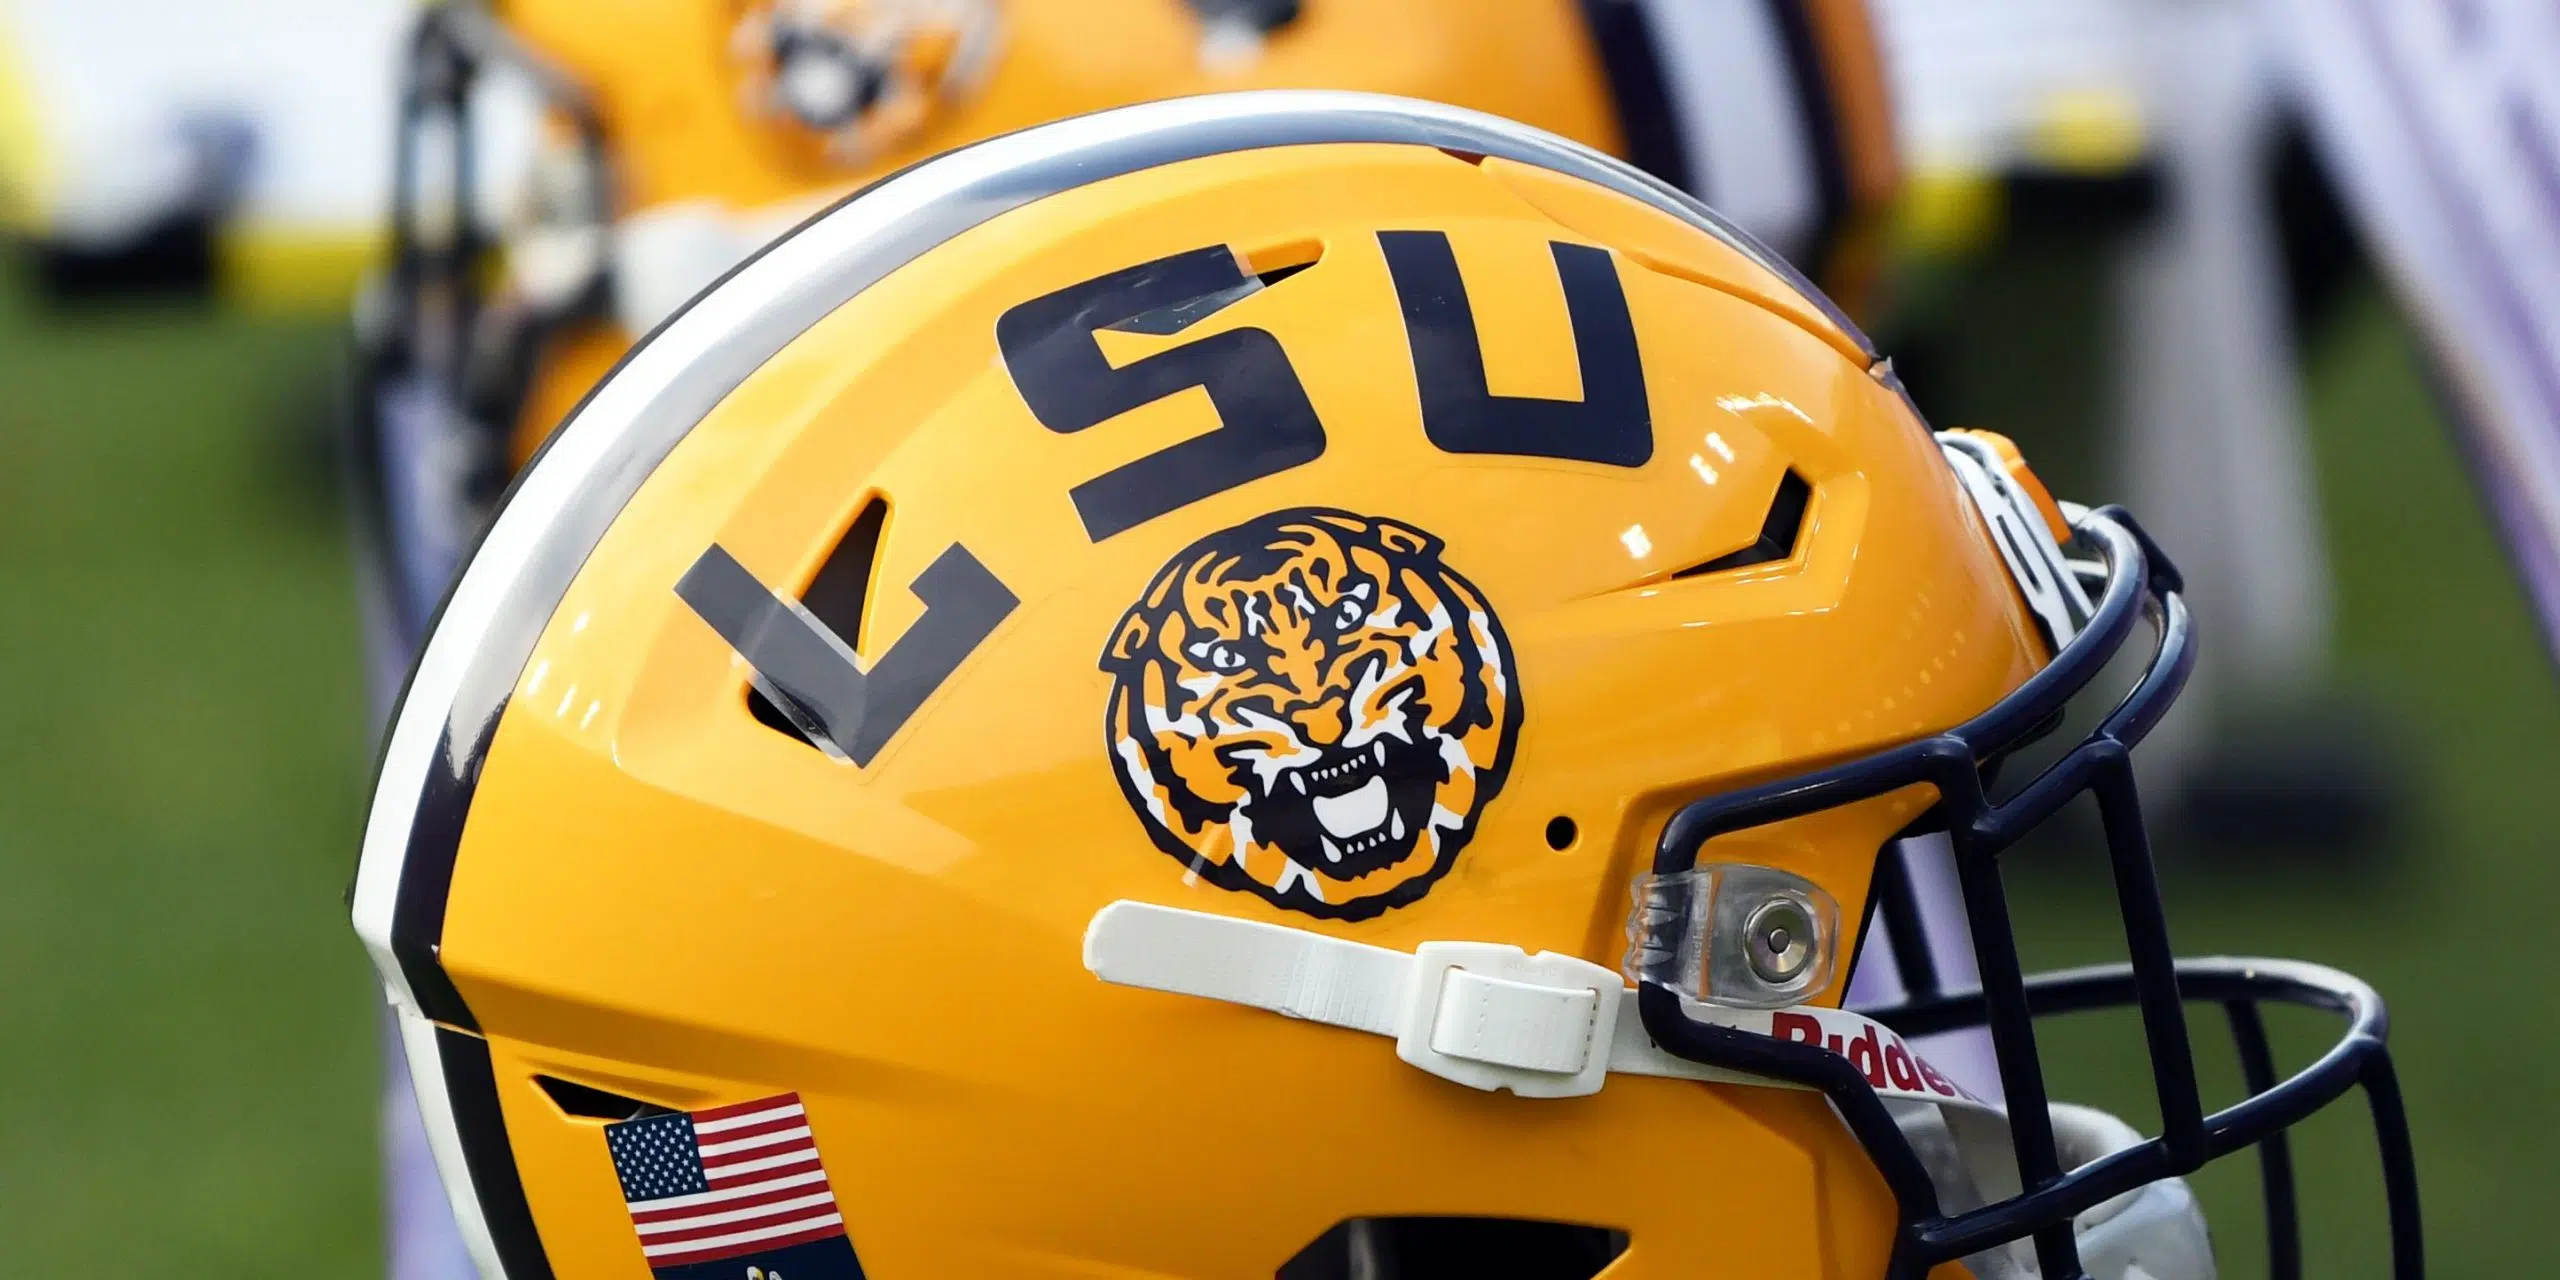 LSU quarterback Myles Brennan will miss significant time after undergoing surgery on his arm